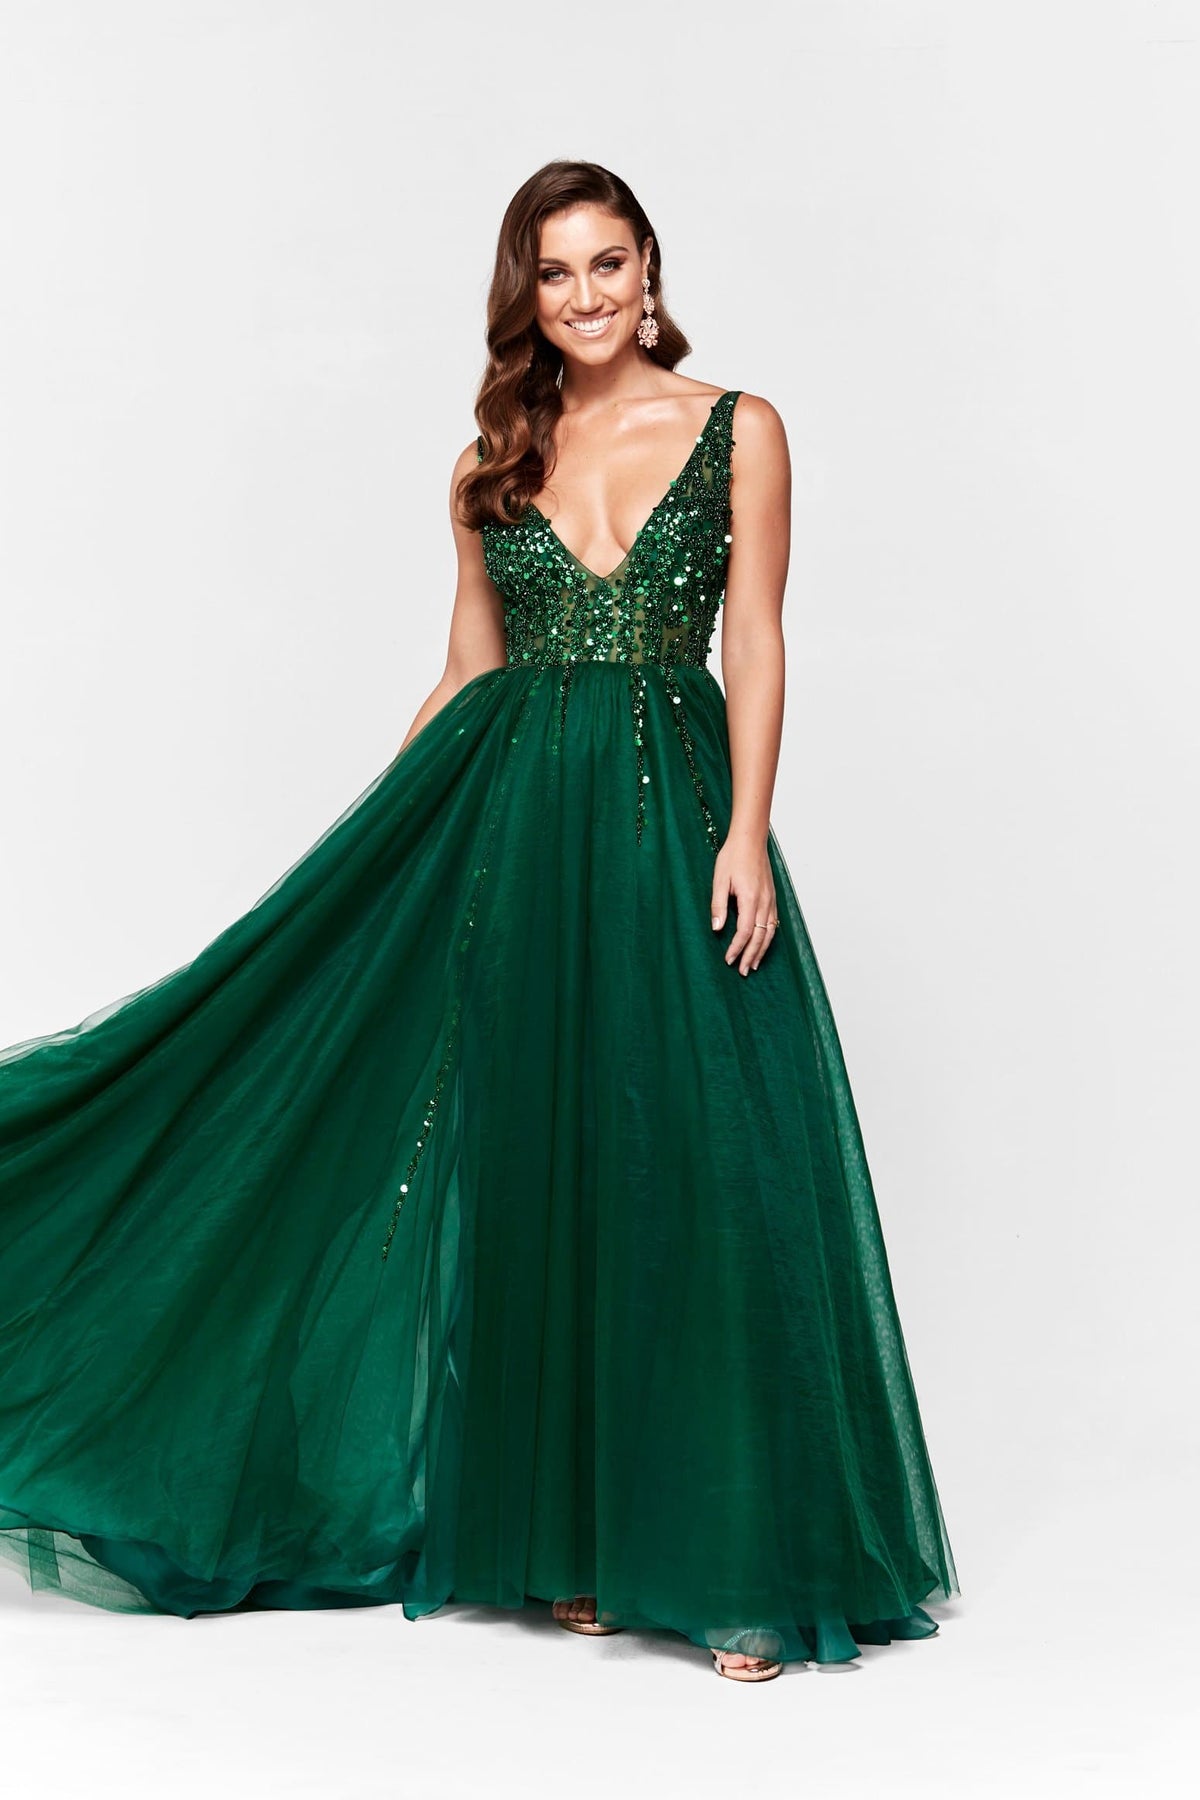 A☀N Princessa - Emerald Tulle Gown with ...